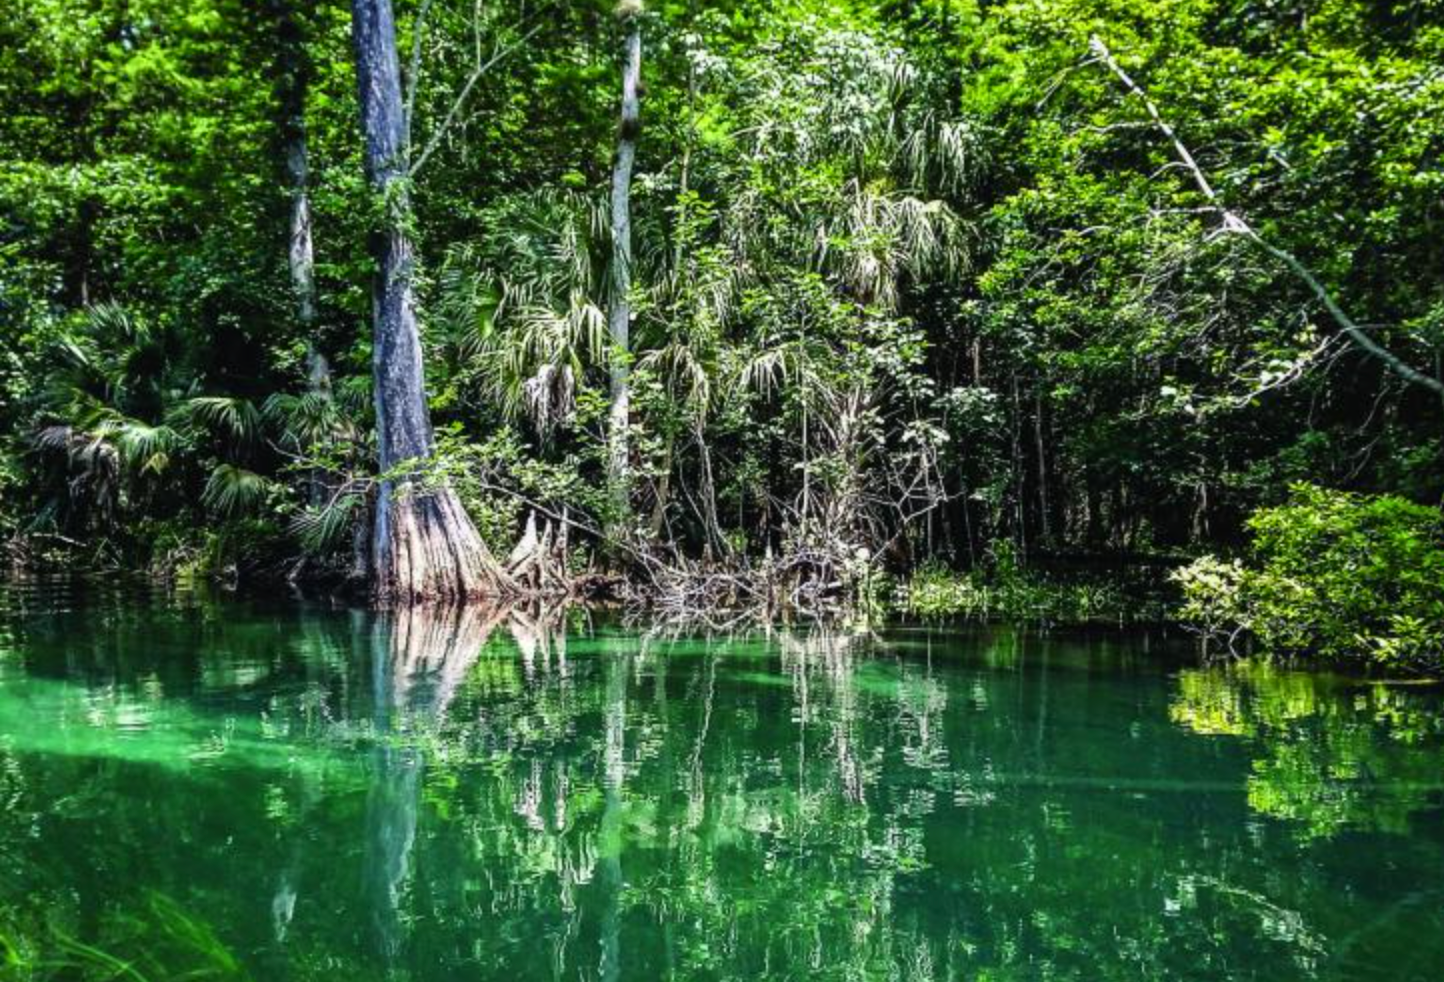 Ichetucknee Springs State Park: The perfect place to stay cool in the hot summer.